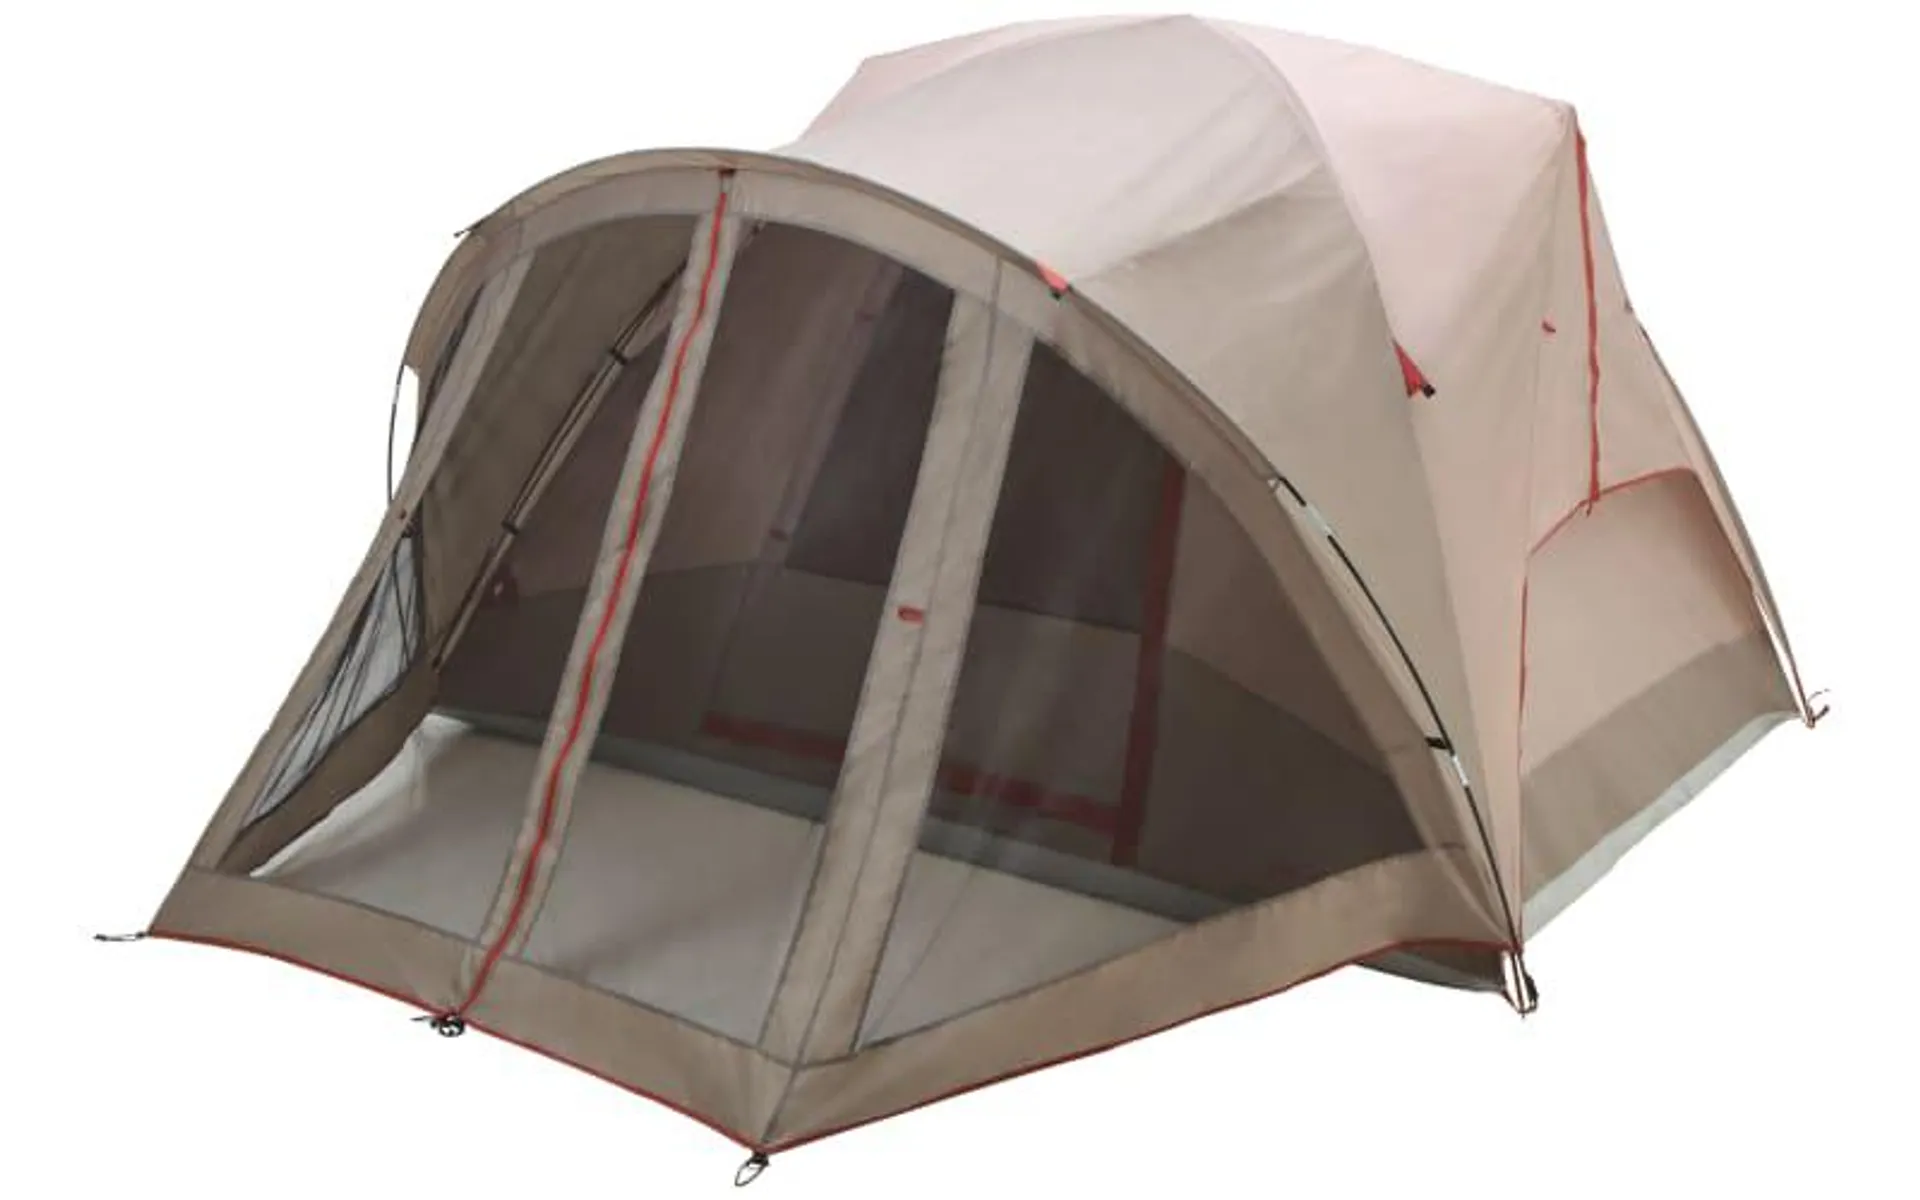 Bass Pro Shops Eclipse Voyager 4-Person Tent with Screen Porch